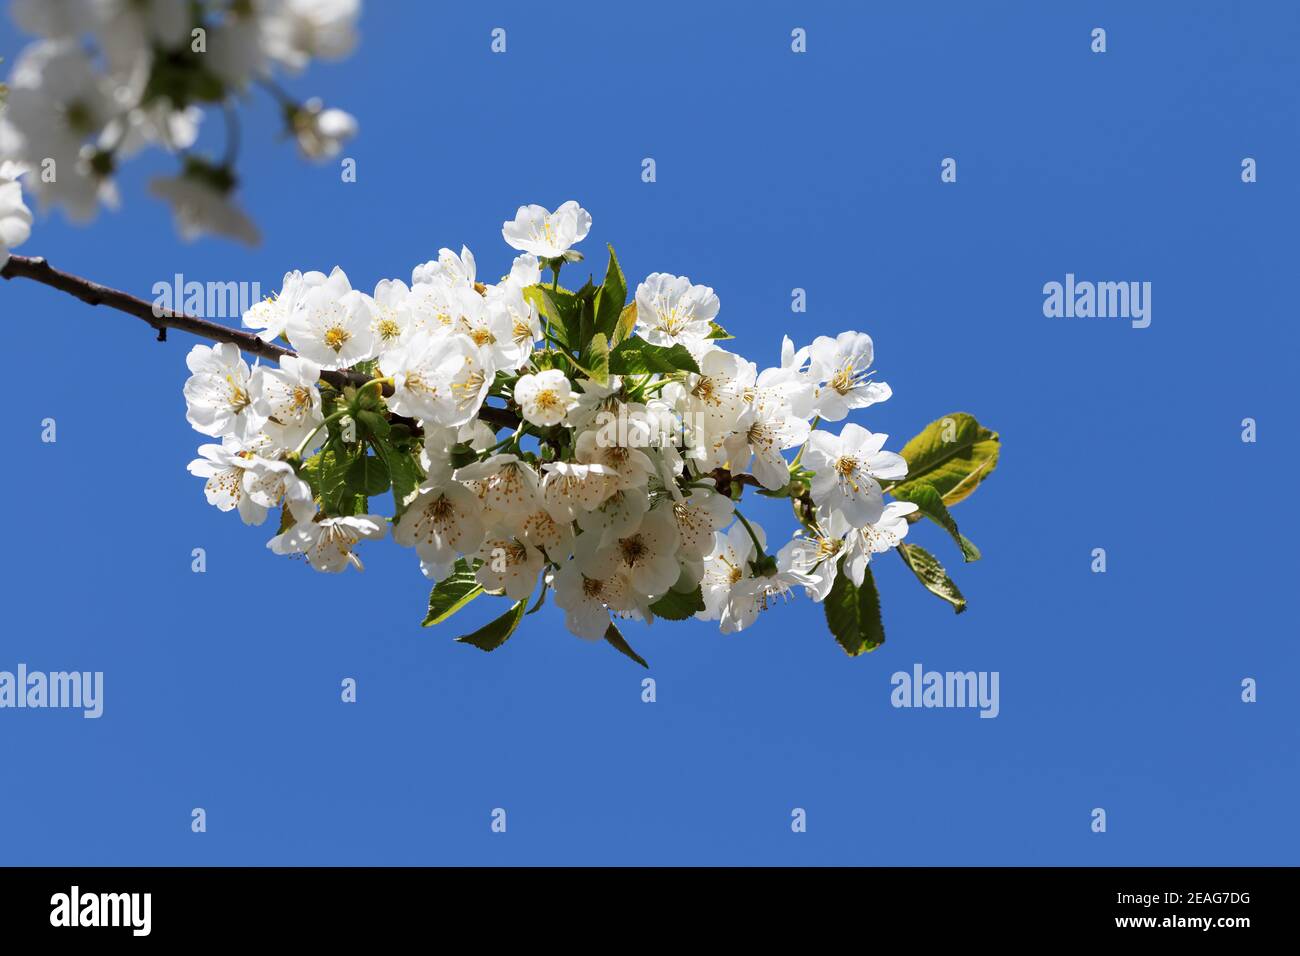 Sunlight blooming branch of fruit tree at sun day on blue background. Flowering plant in the rose family Rosaceae, genus Prunus. Wild cherry. Stock Photo